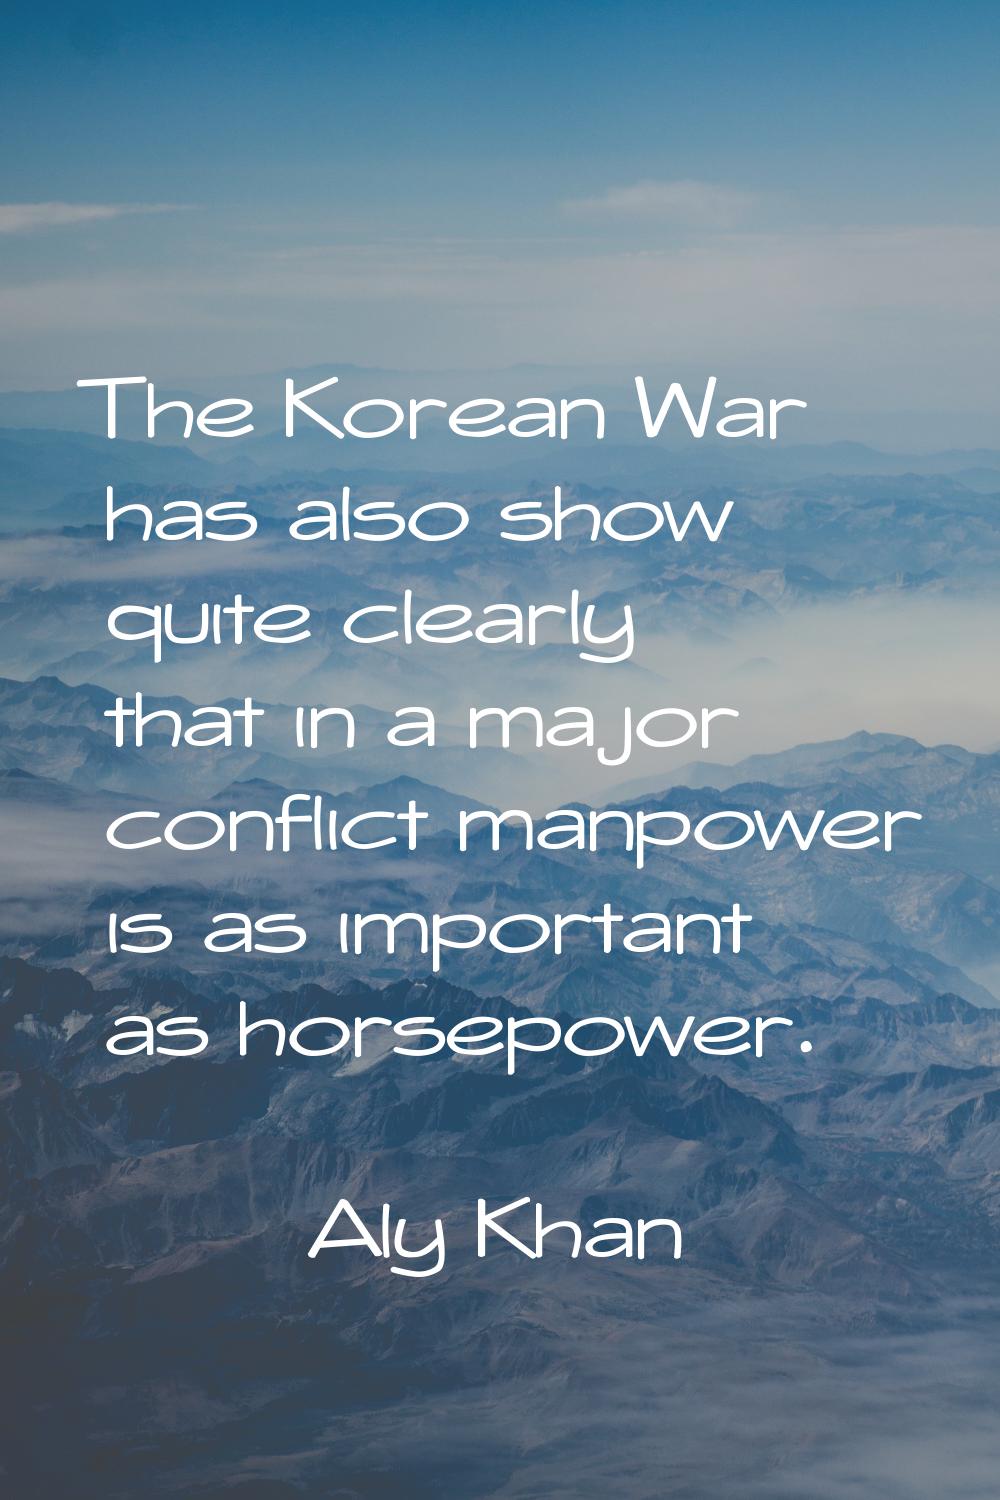 The Korean War has also show quite clearly that in a major conflict manpower is as important as hor